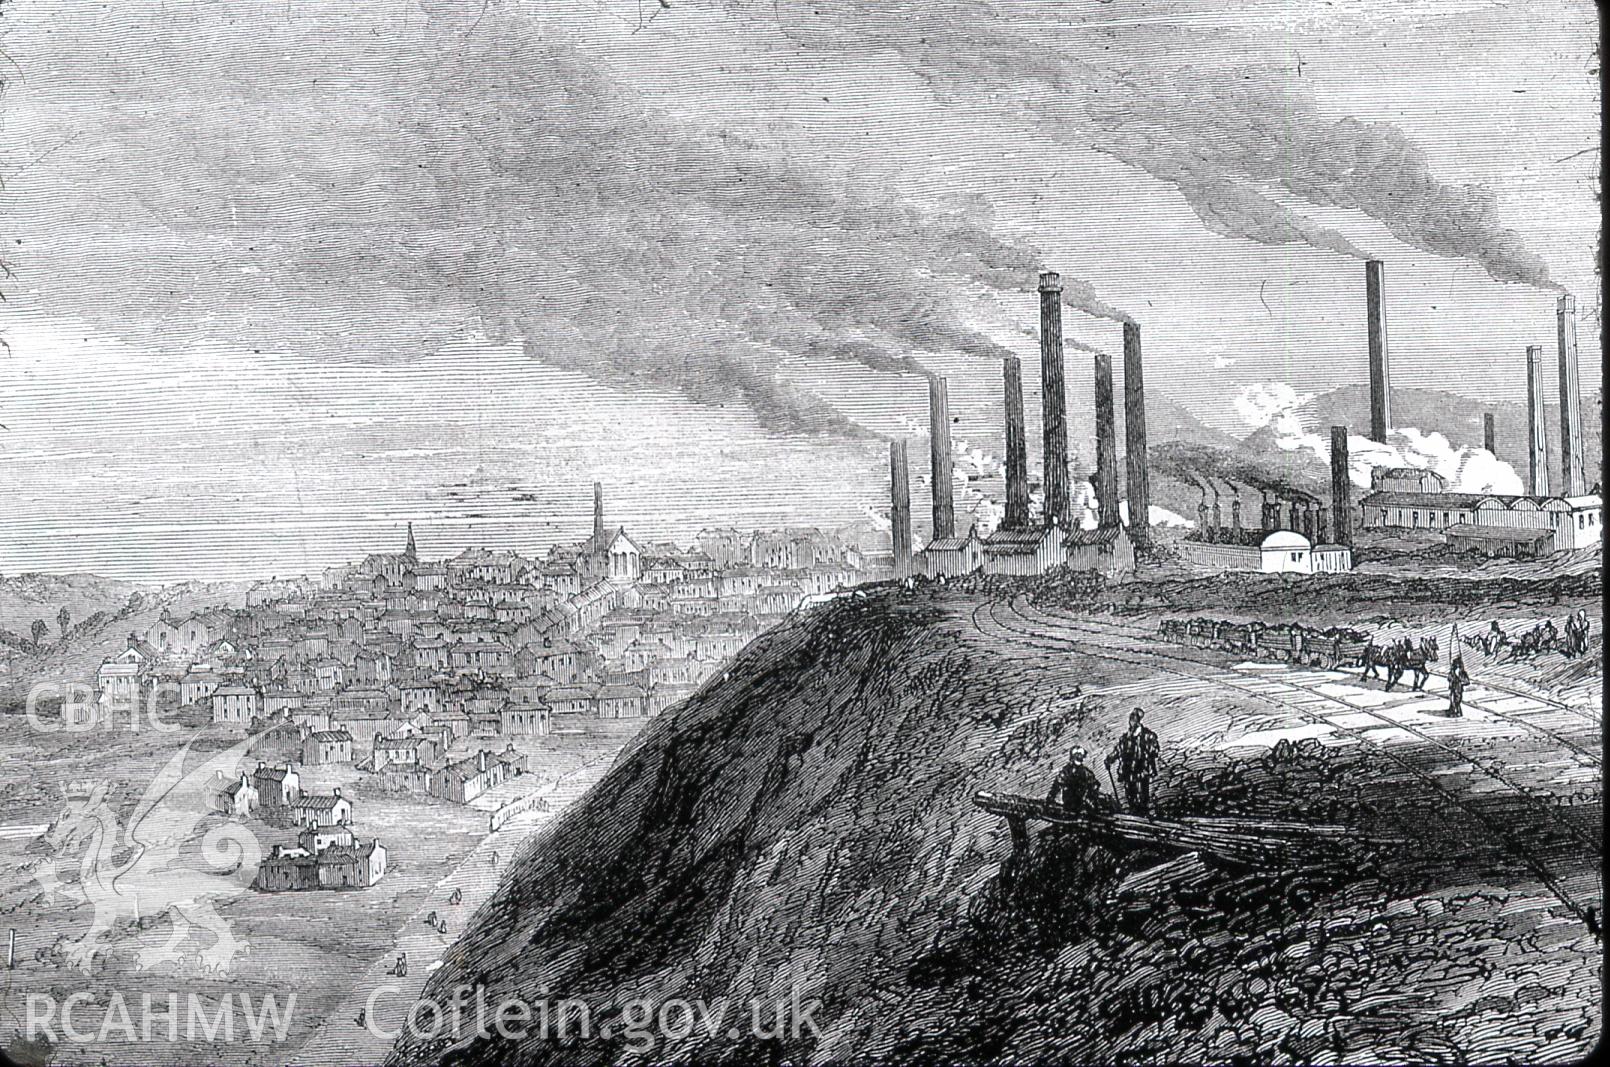 Digital copy of etching from London Illustrated News entitled: 'The Lockout in South Wales: Dowlais from the Cinder Heaps', dated 1875.